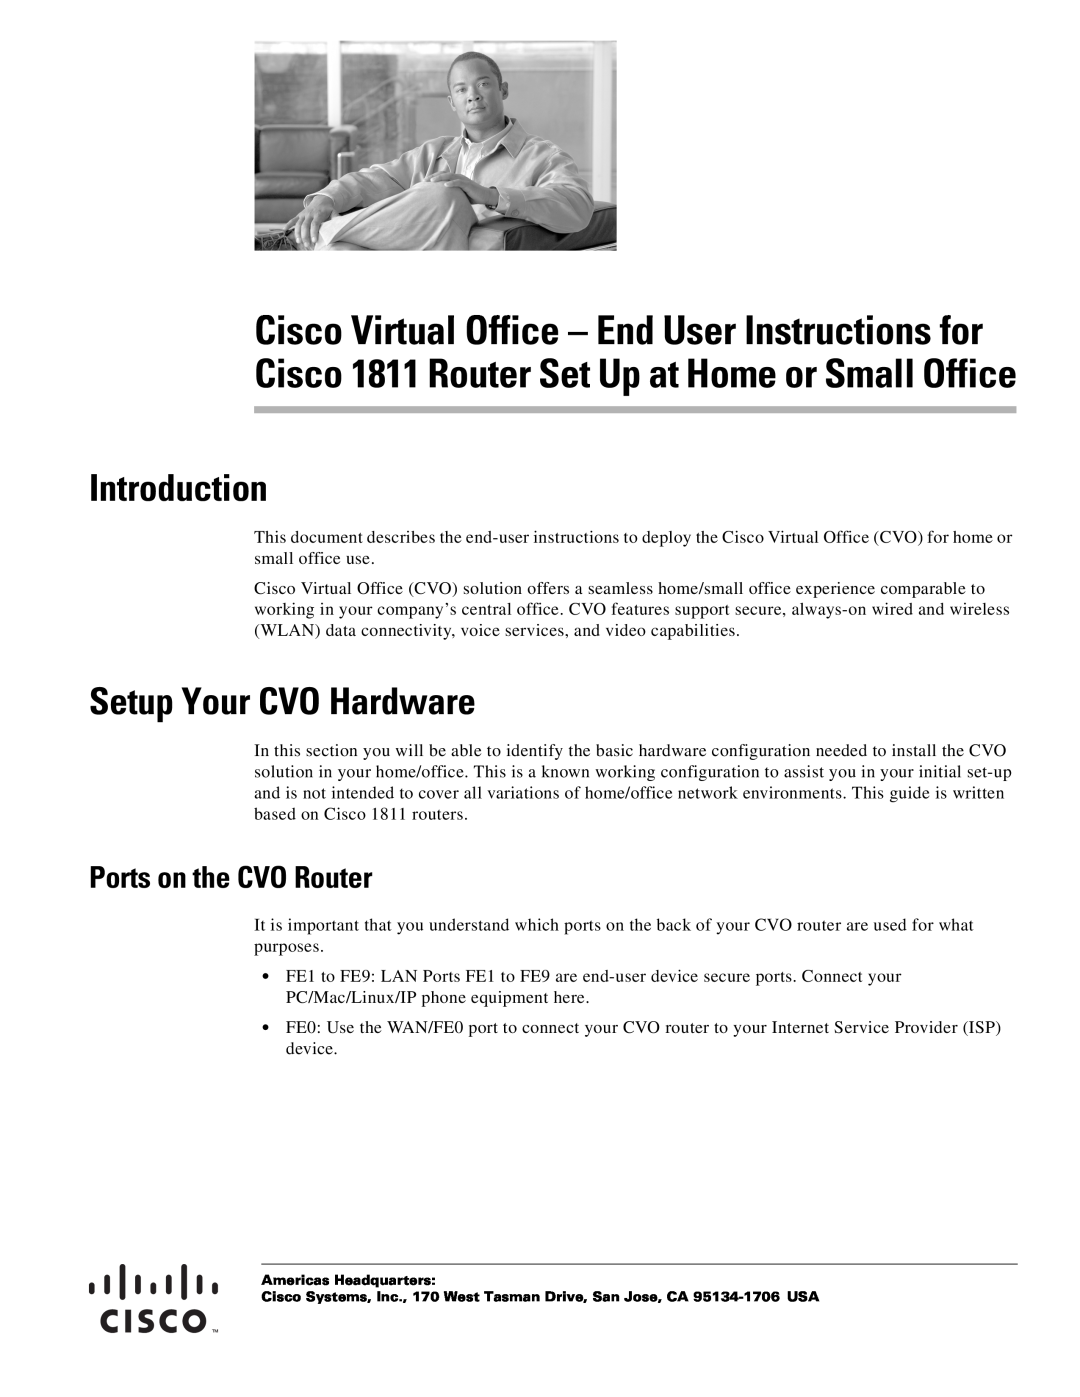 Cisco Systems CISCO1811 manual Introduction, Setup Your CVO Hardware, Ports on the CVO Router 